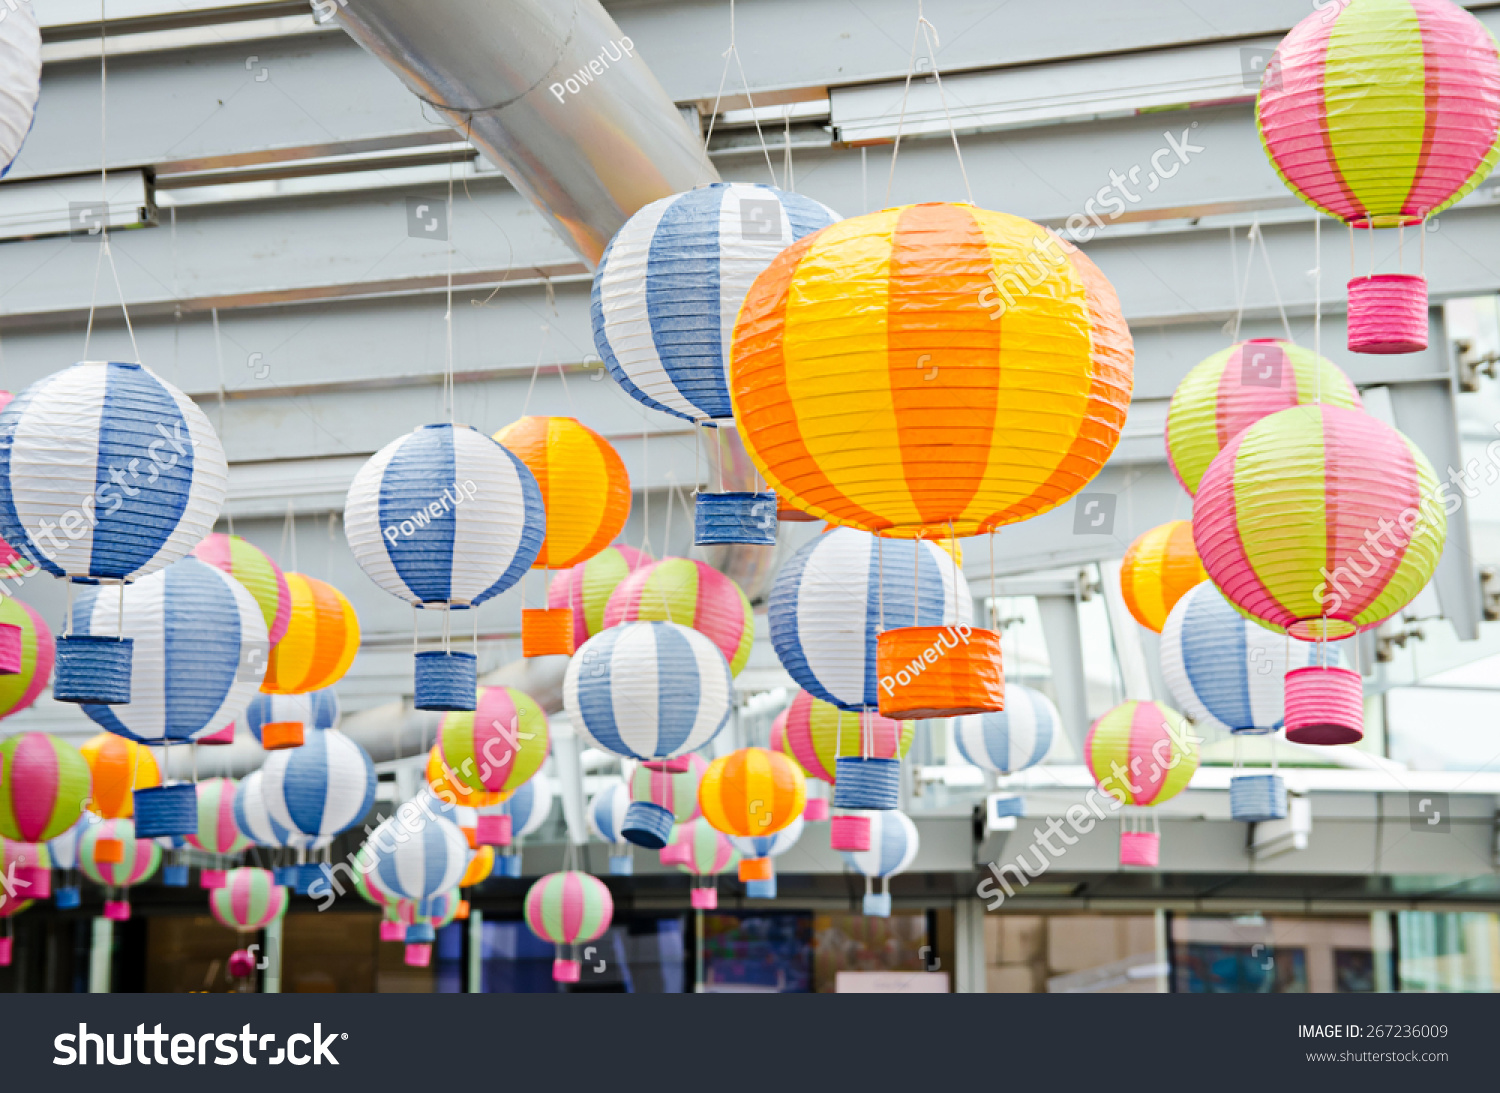 Hot Air Balloon Decoration On Ceiling Stock Photo Edit Now